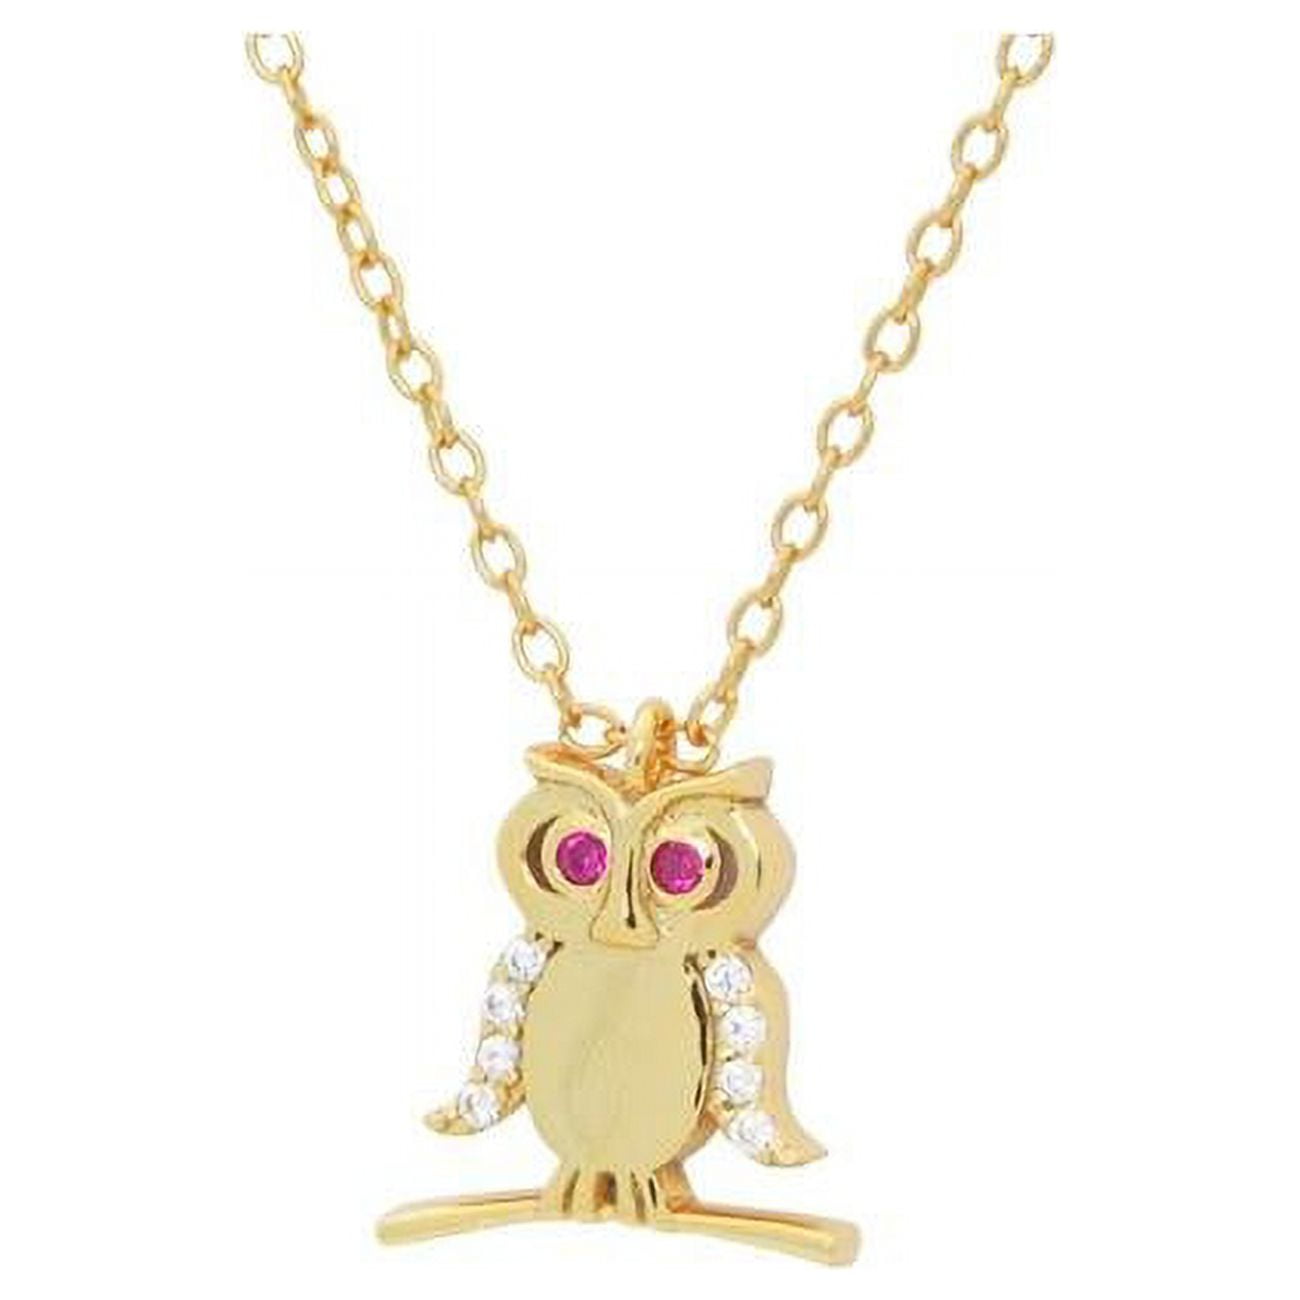 16 & 2 In. Teen Red Cz Owl Pendant Necklace In 18k Gold Plated Silver